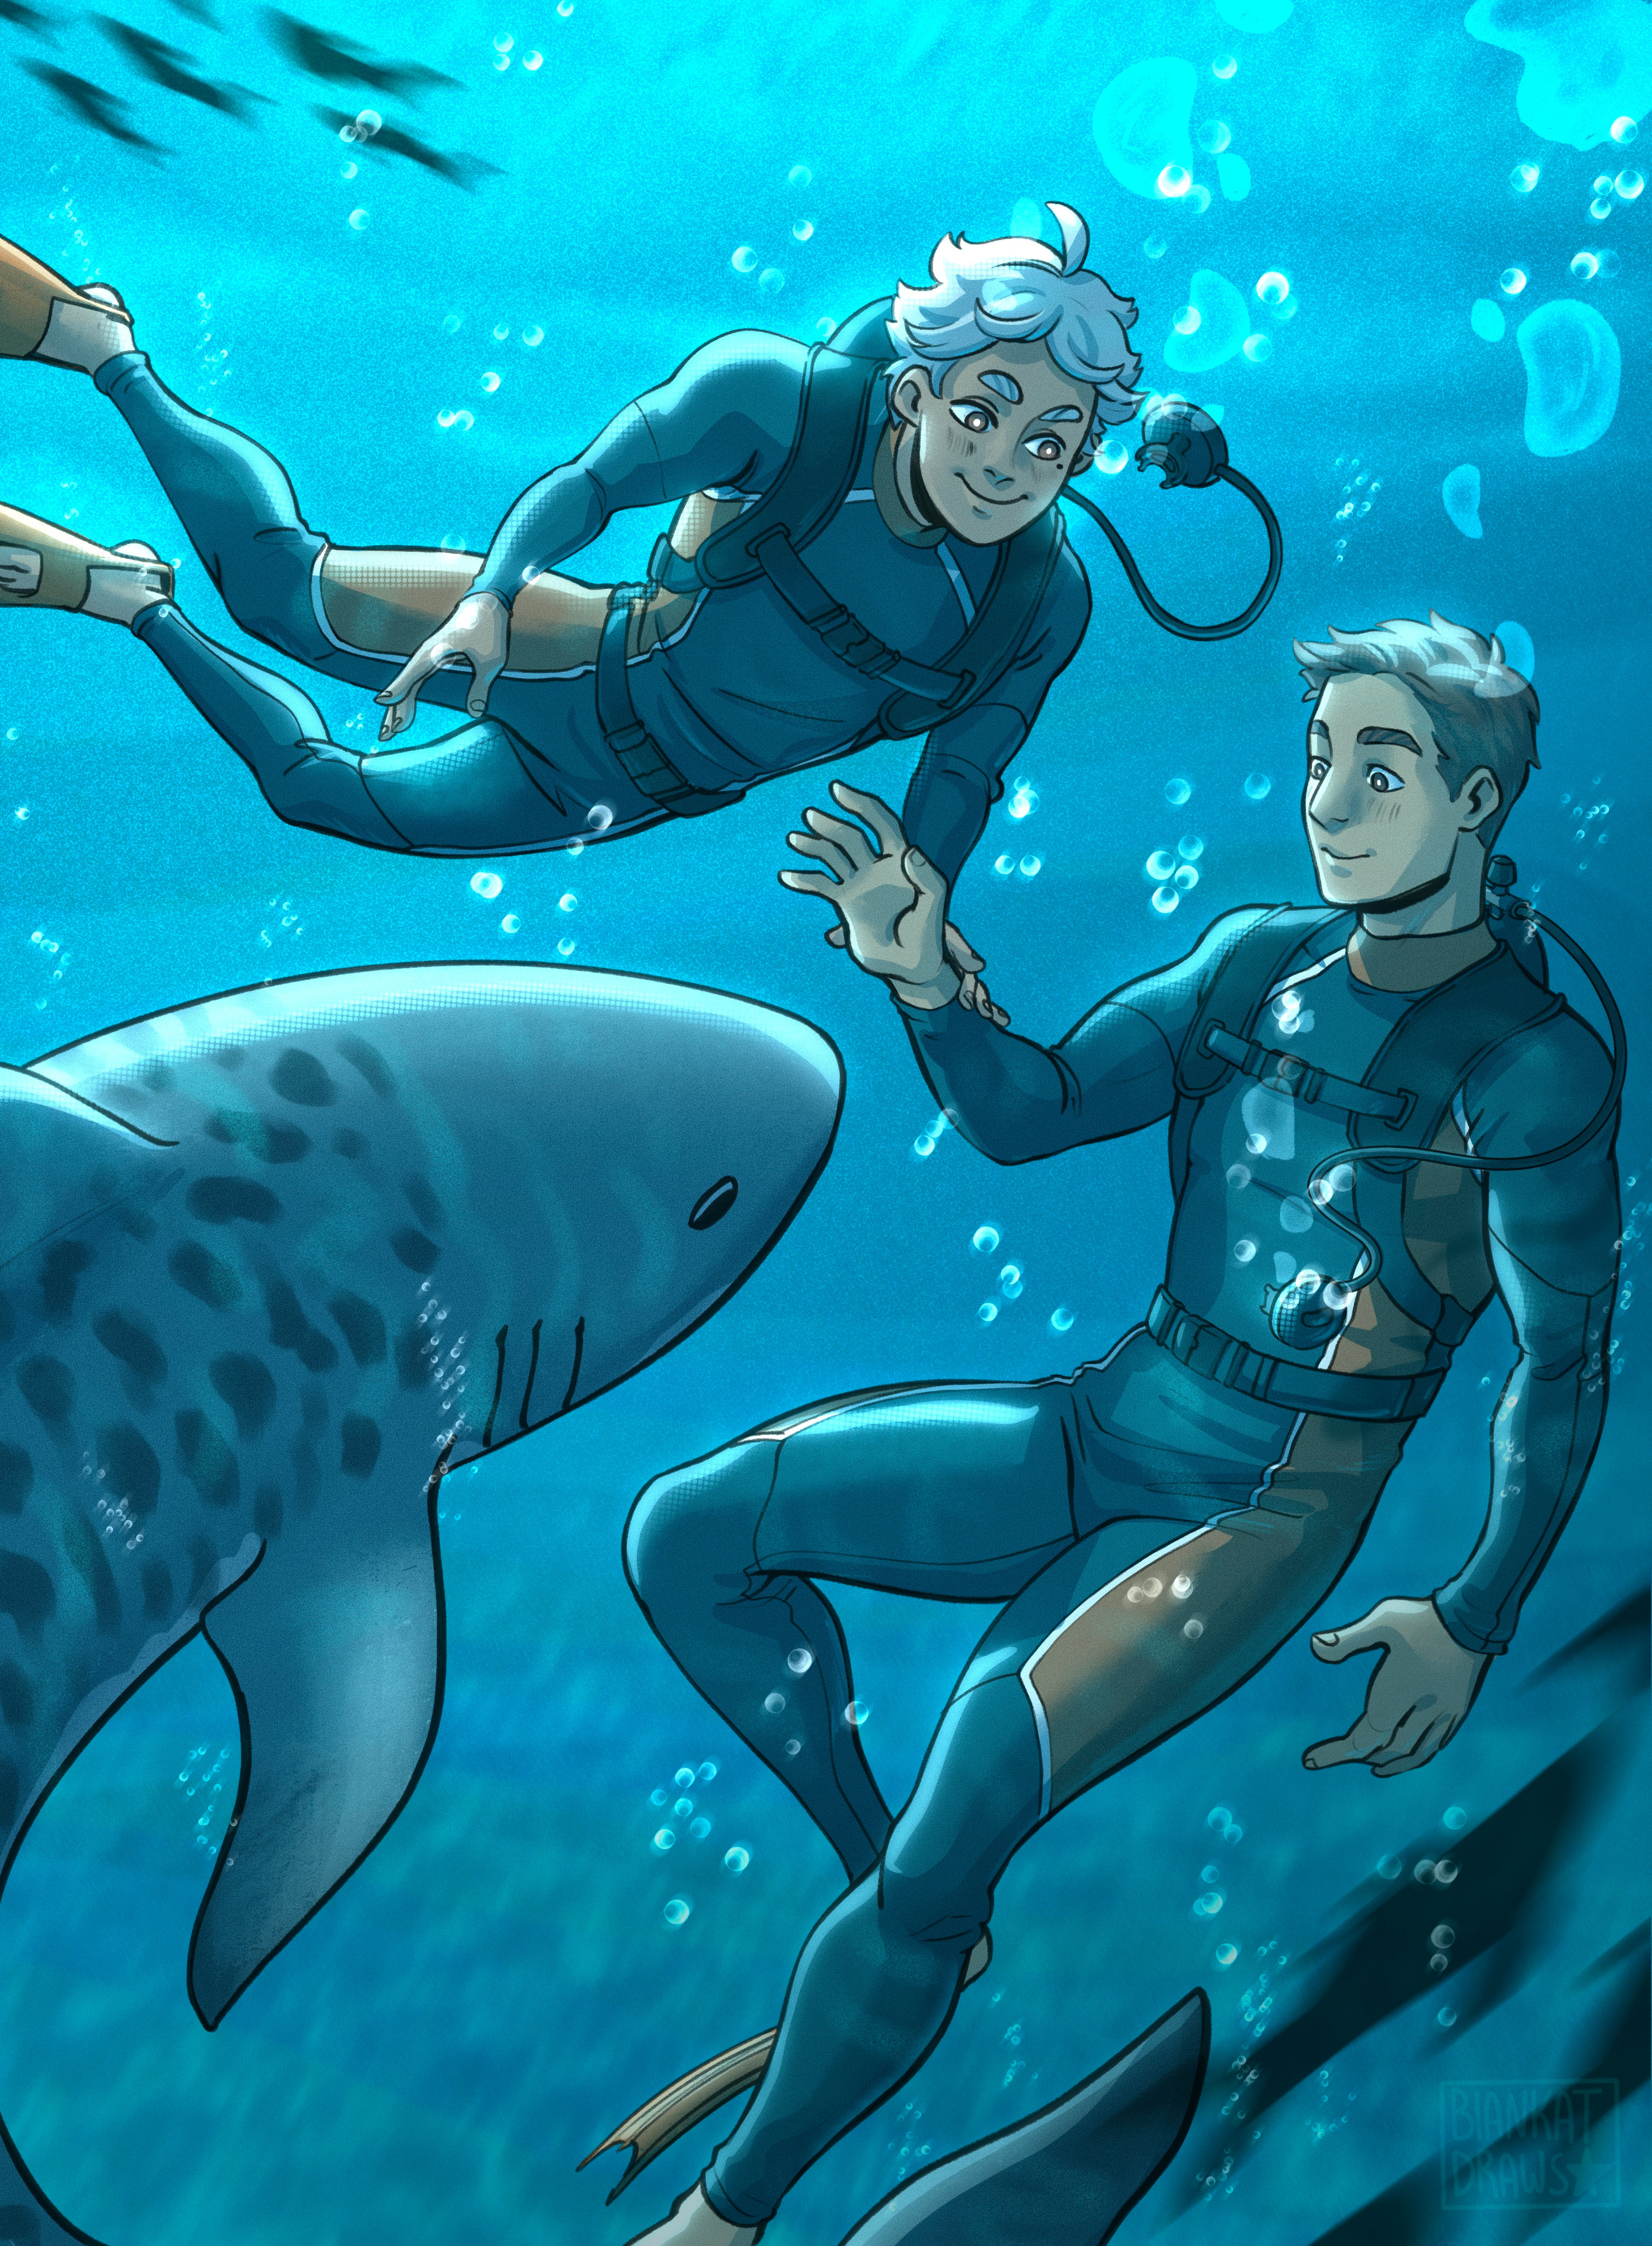 This is probably my favorite commission, simply because my absolute favorite fic writer asked me to draw my 2 favorite characters with sharks. It doesn’t get better than this.